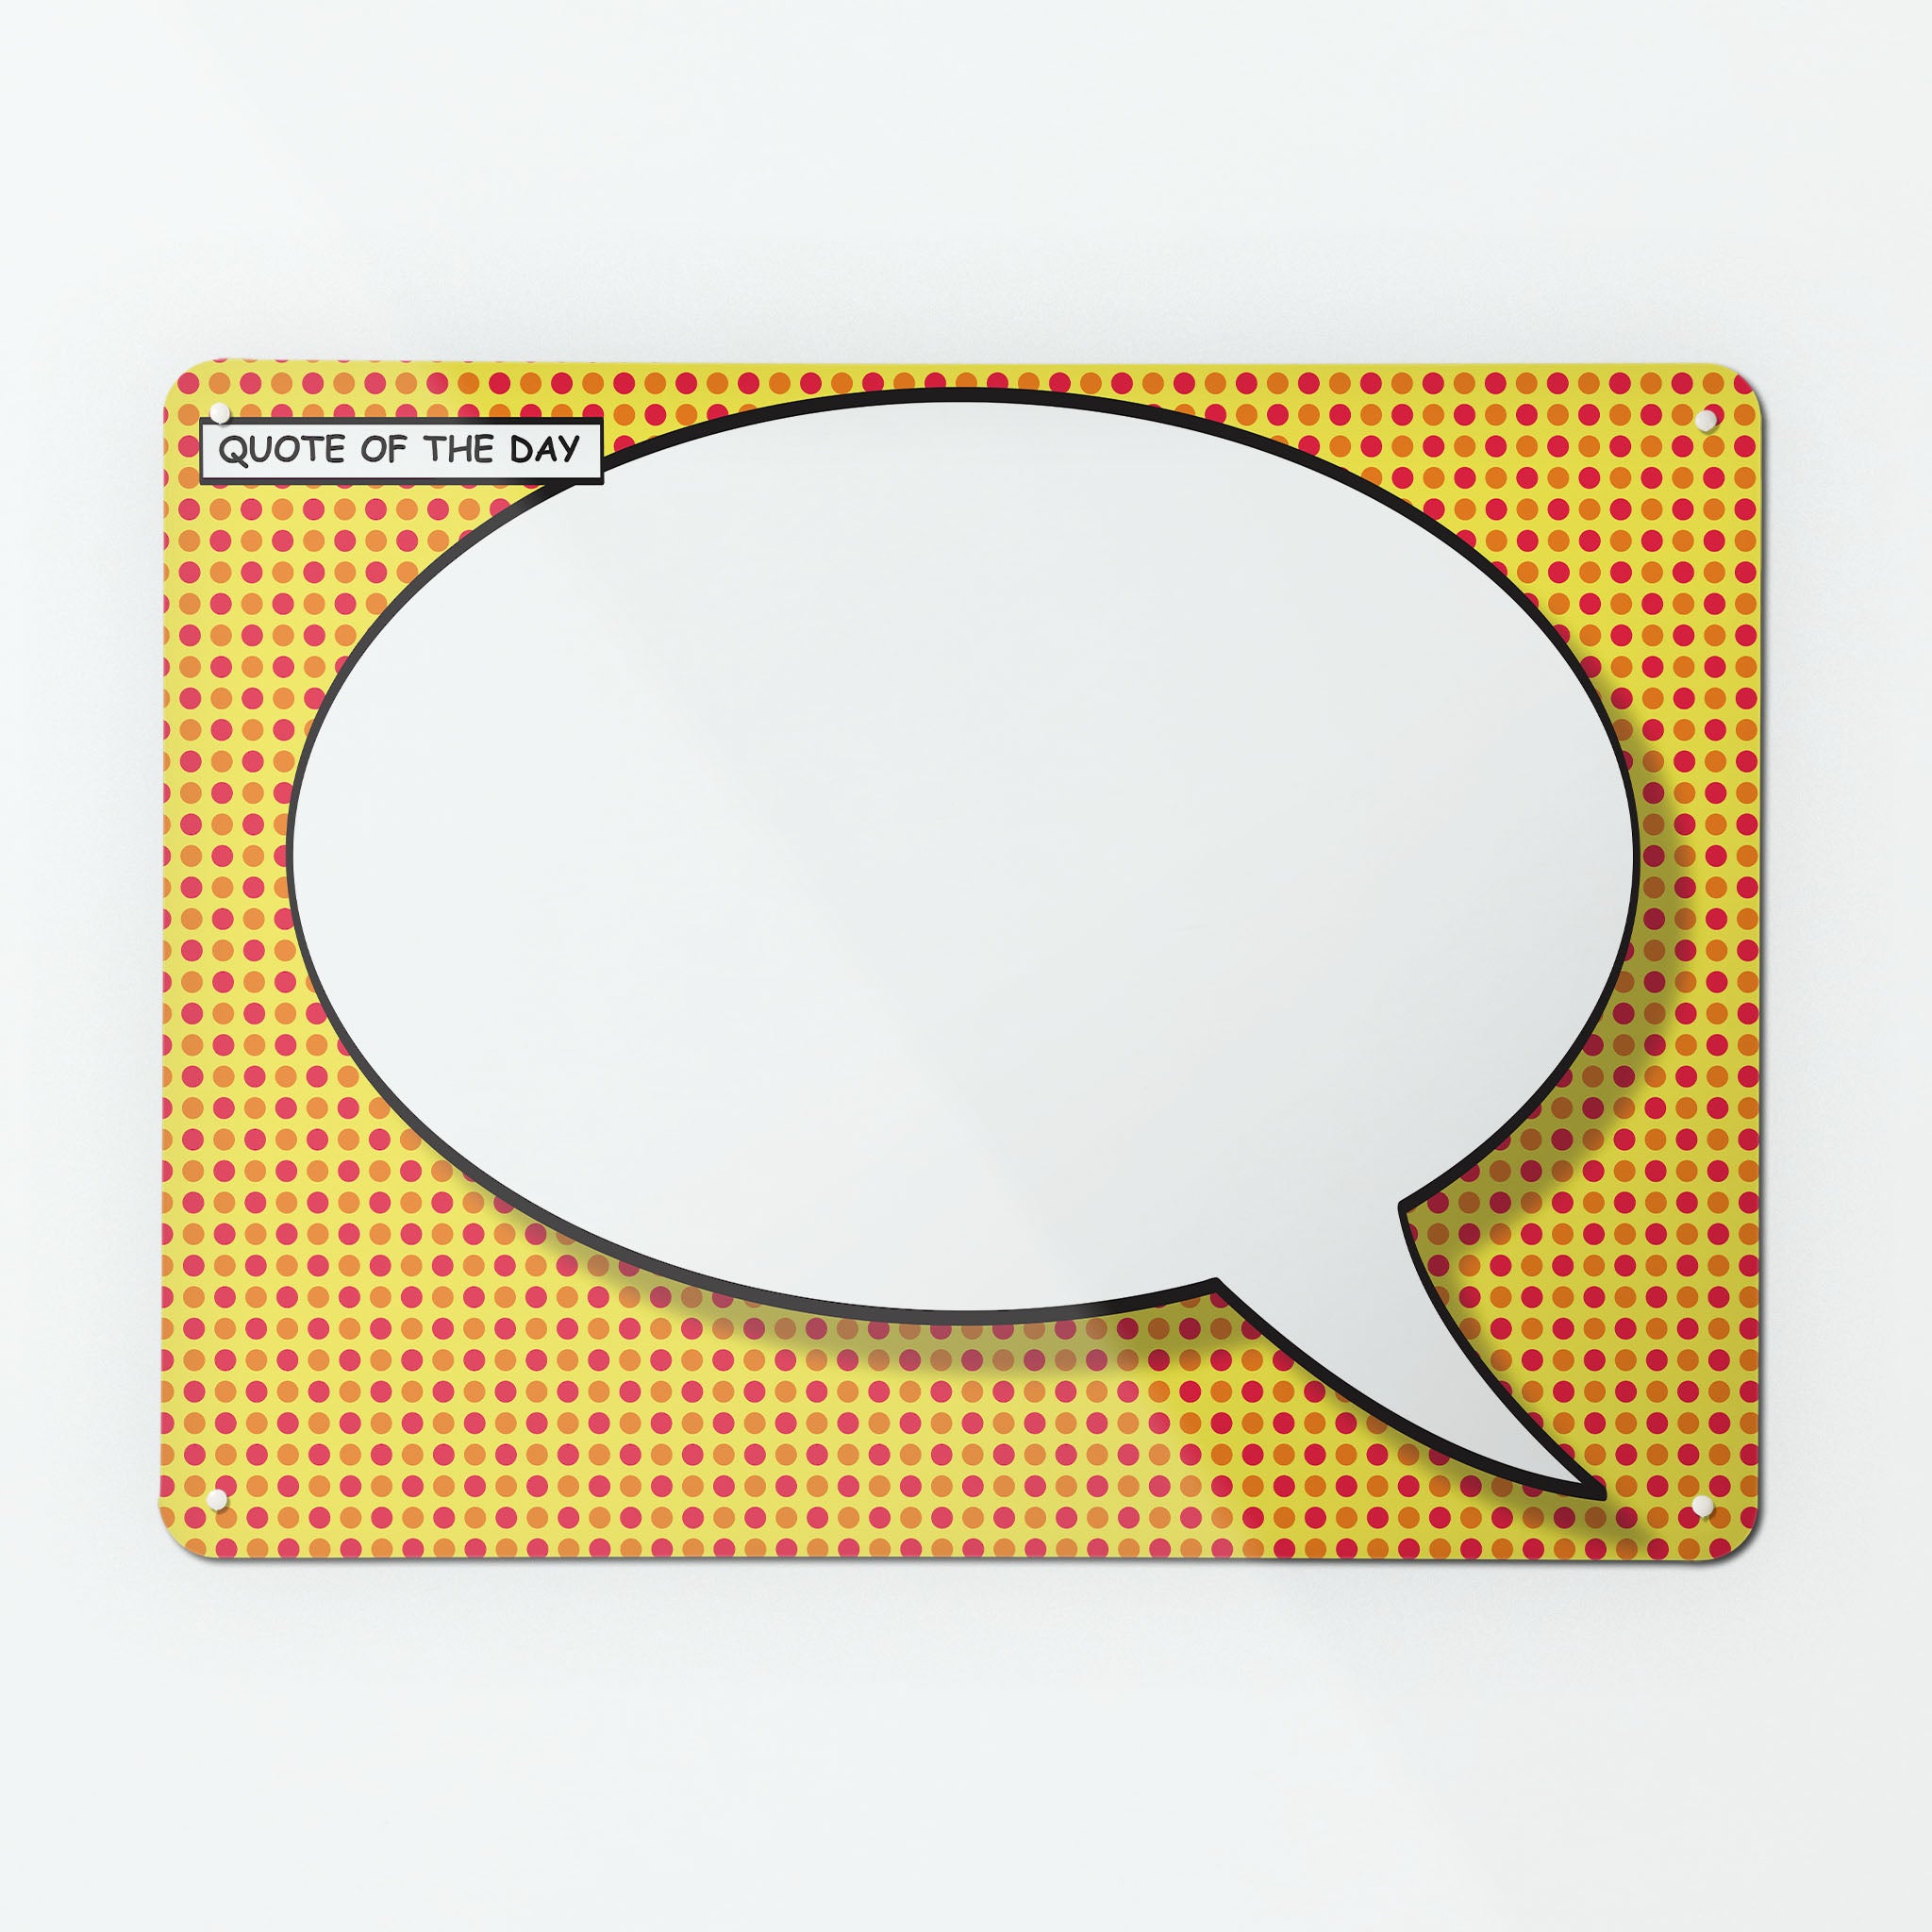 A large magnetic notice board by Beyond the Fridge with a cartoon speech bubble design in white on a red and yellow background